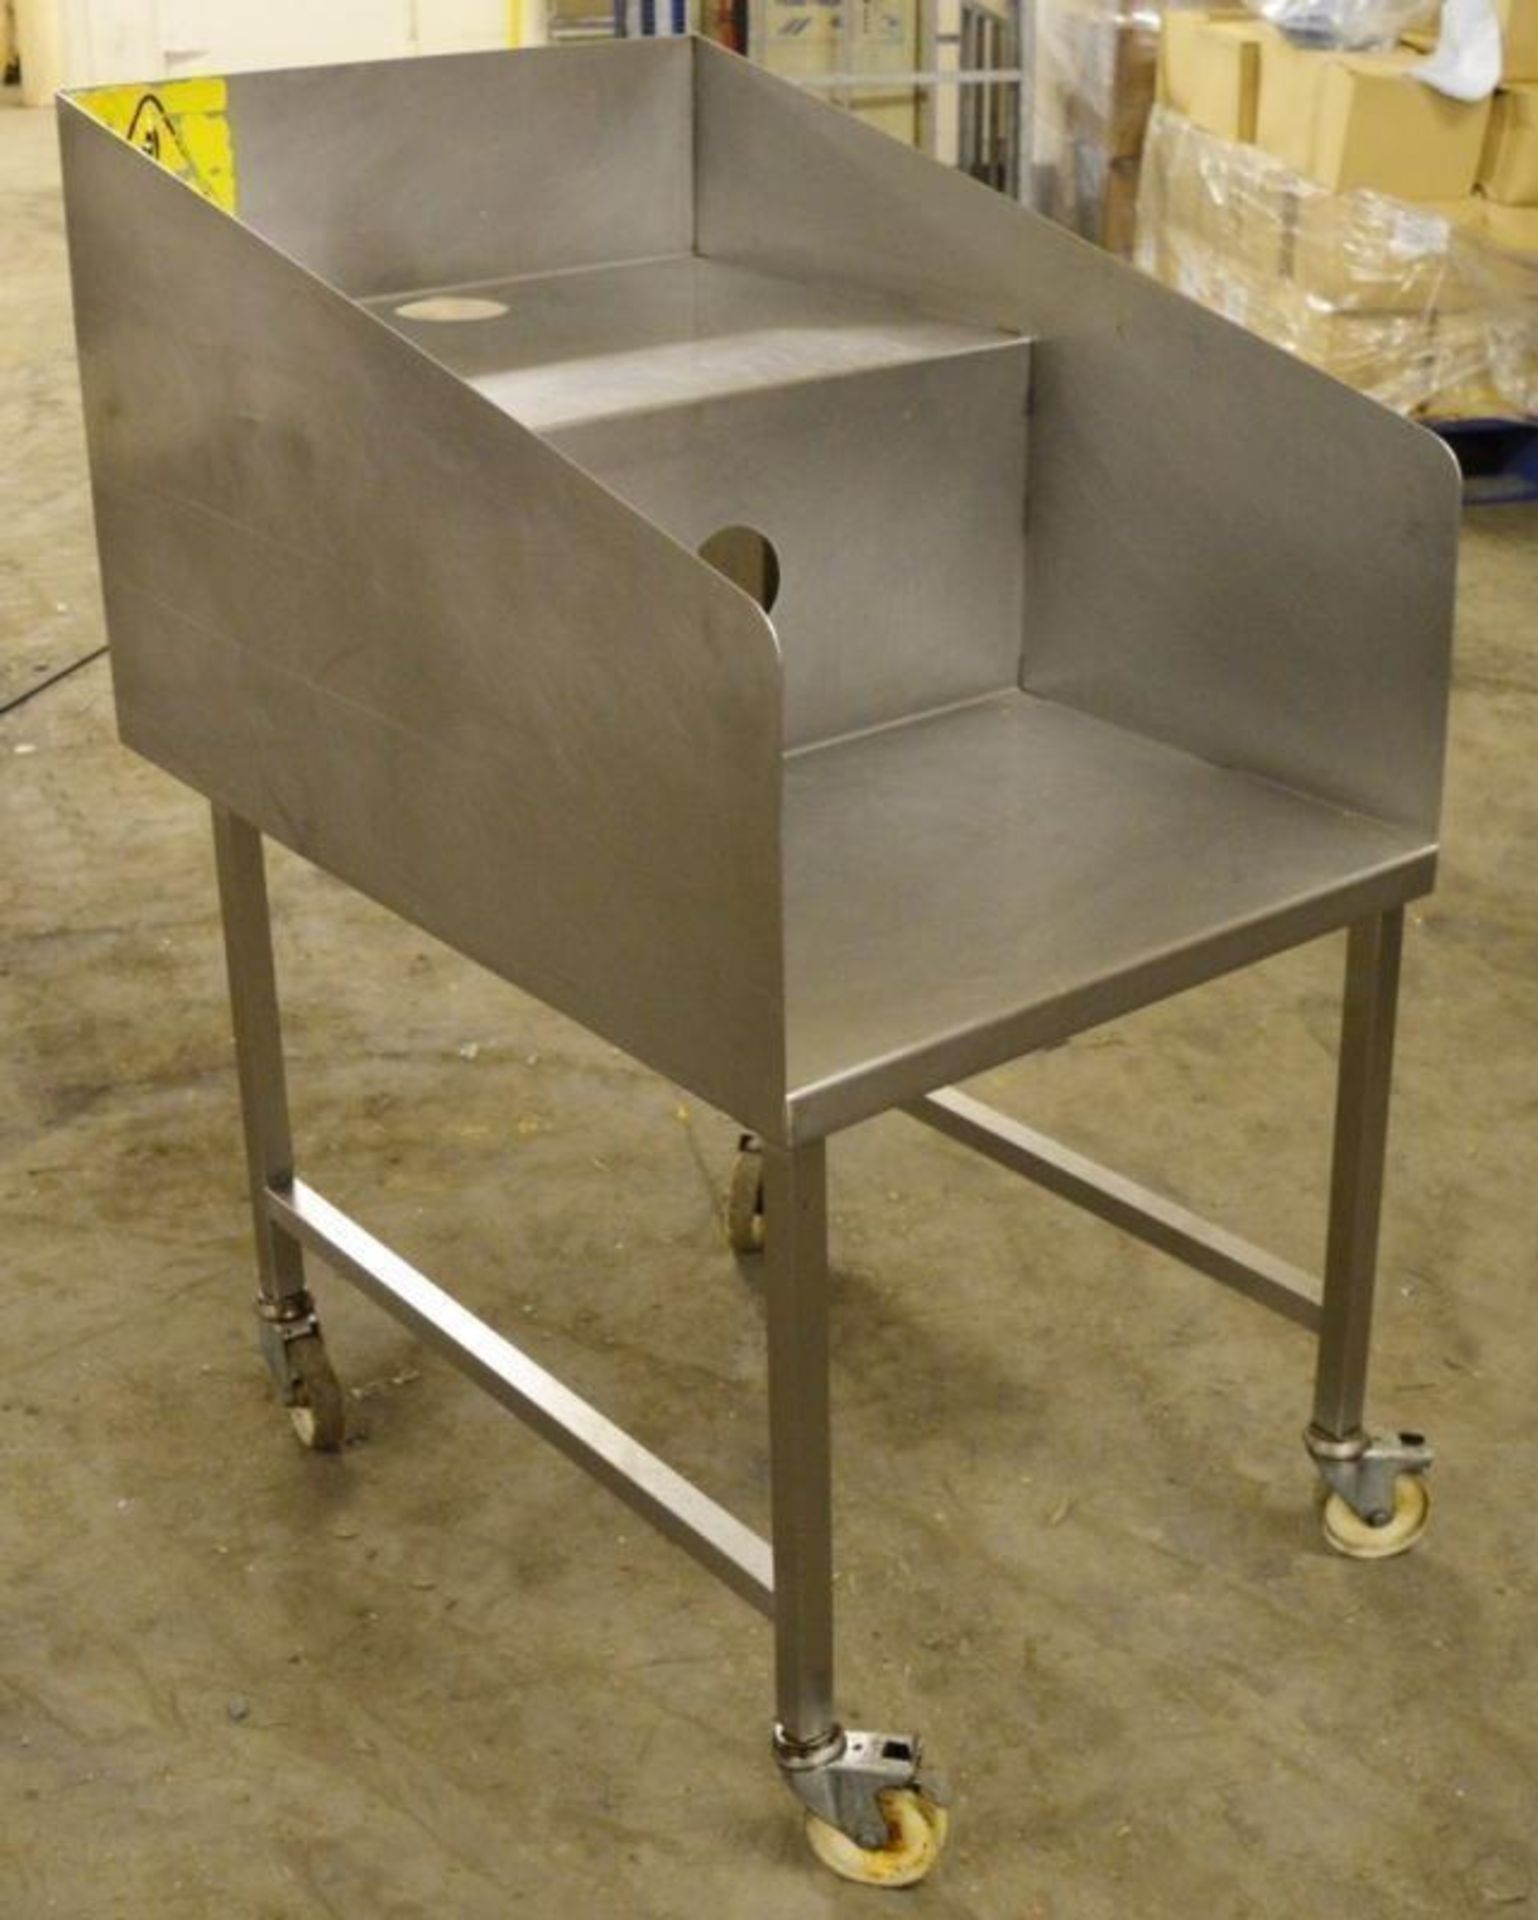 1 x Stainless Steel Commercial Waste Bench - Two Tier Waste Chute on Castors - H114 x W62.5 x D90 cm - Image 4 of 5